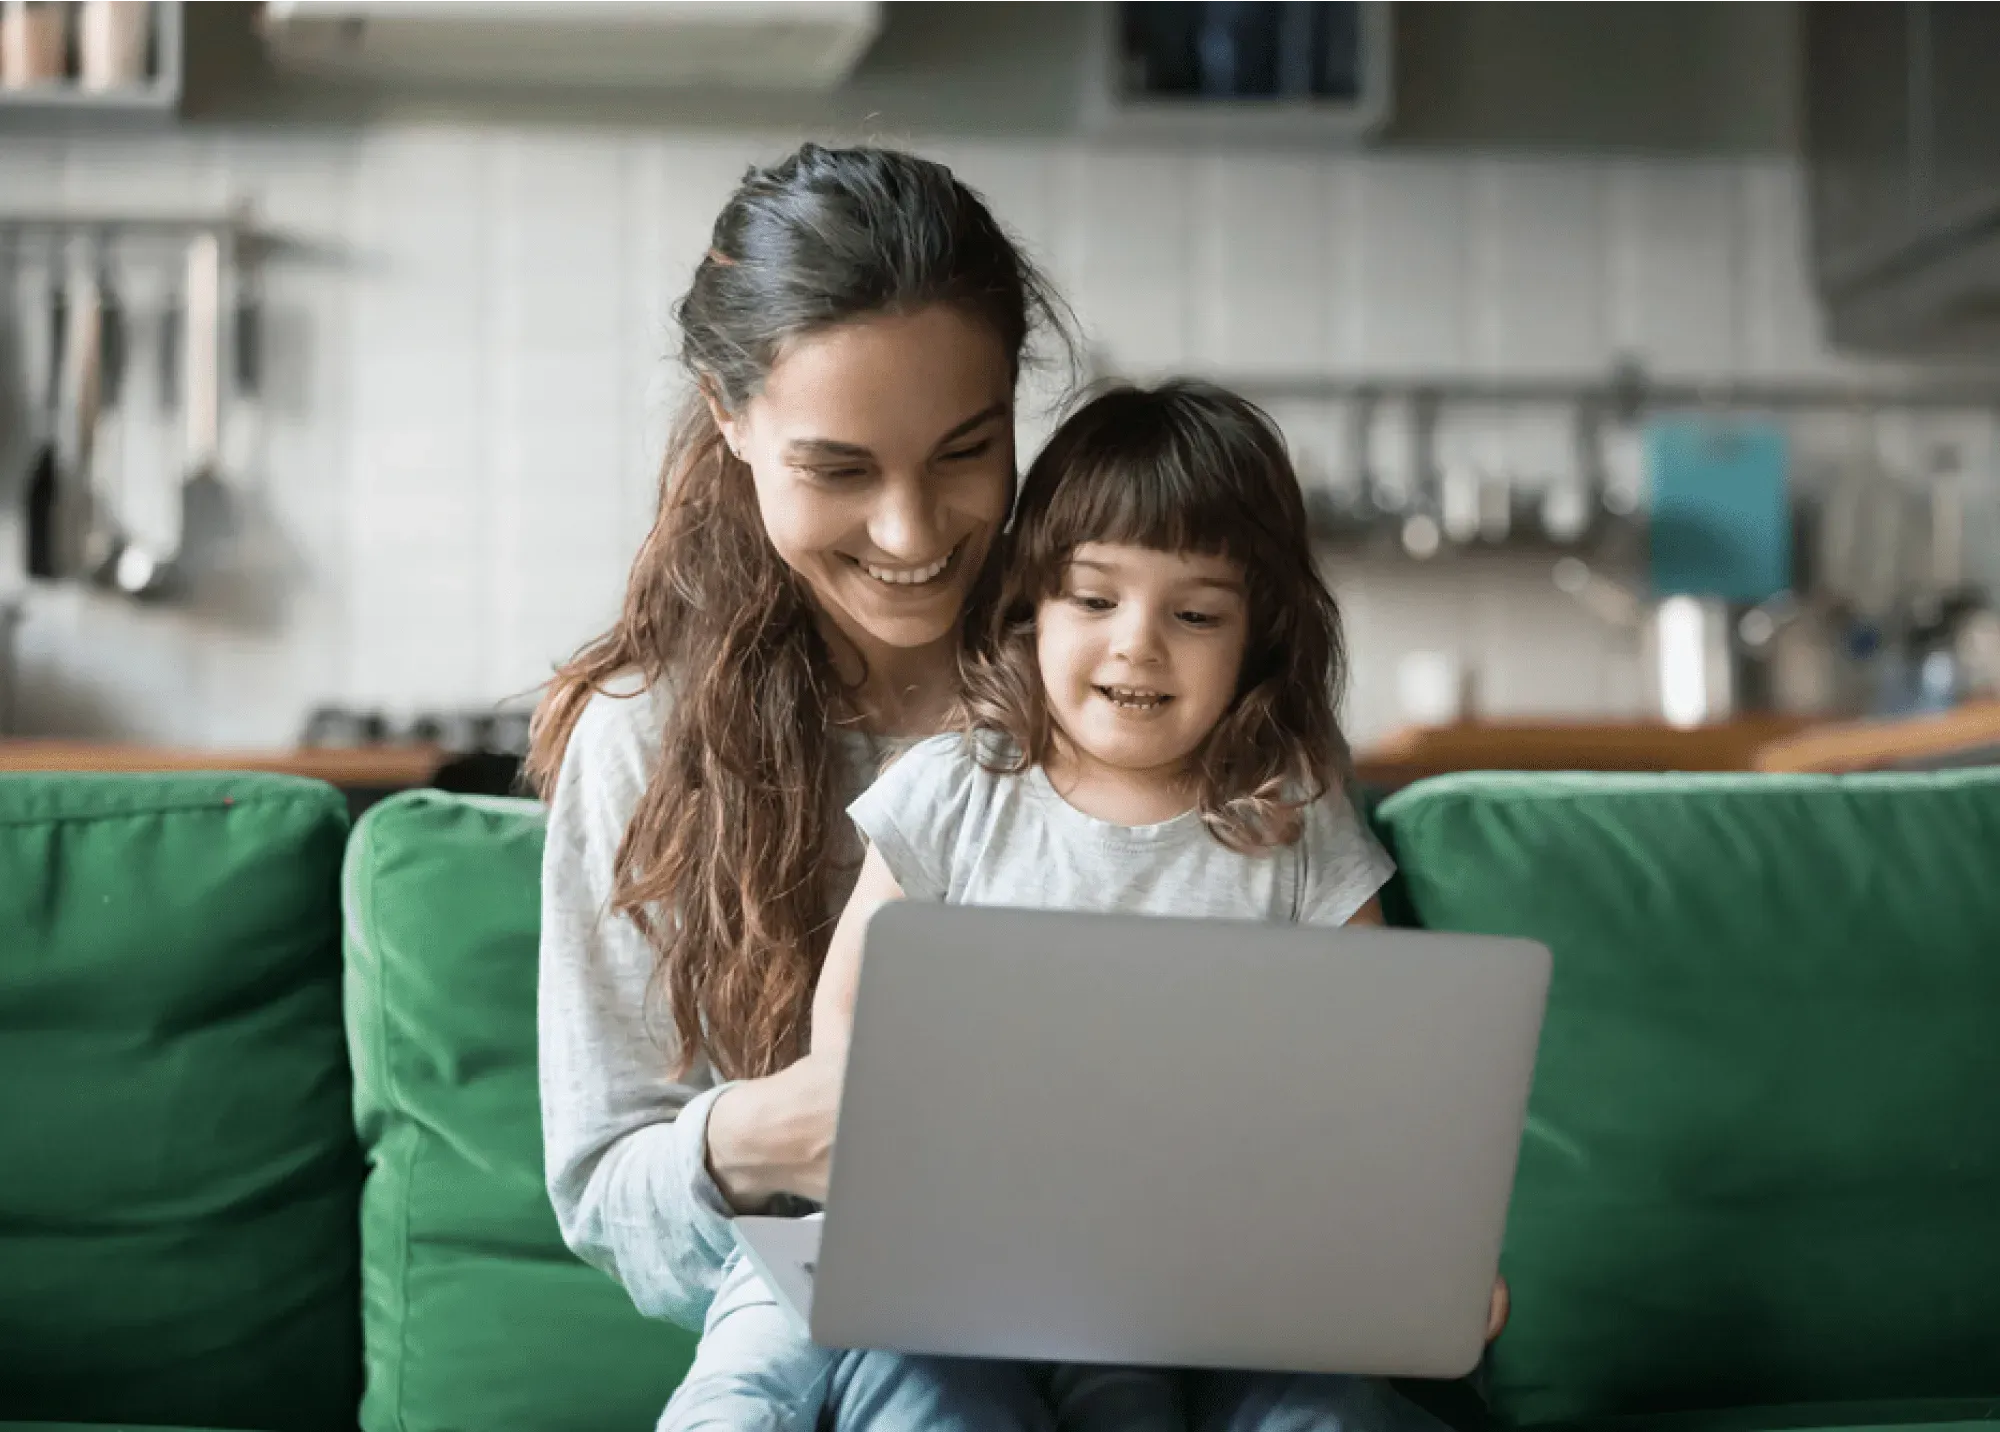 A woman and her child sat at a laptop together, smiling